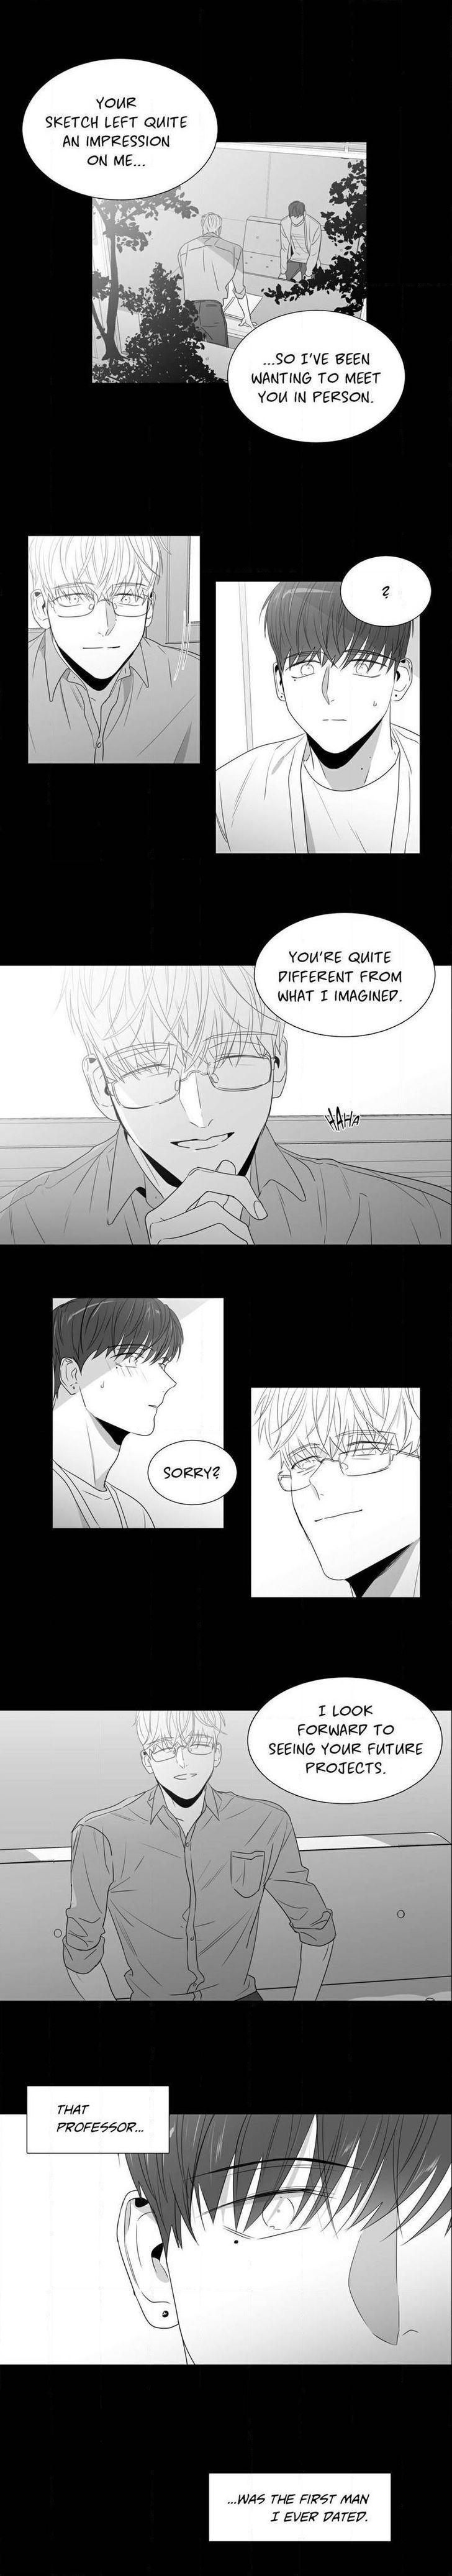 Lover Boy (Lezhin) Chapter 048.1 page 2